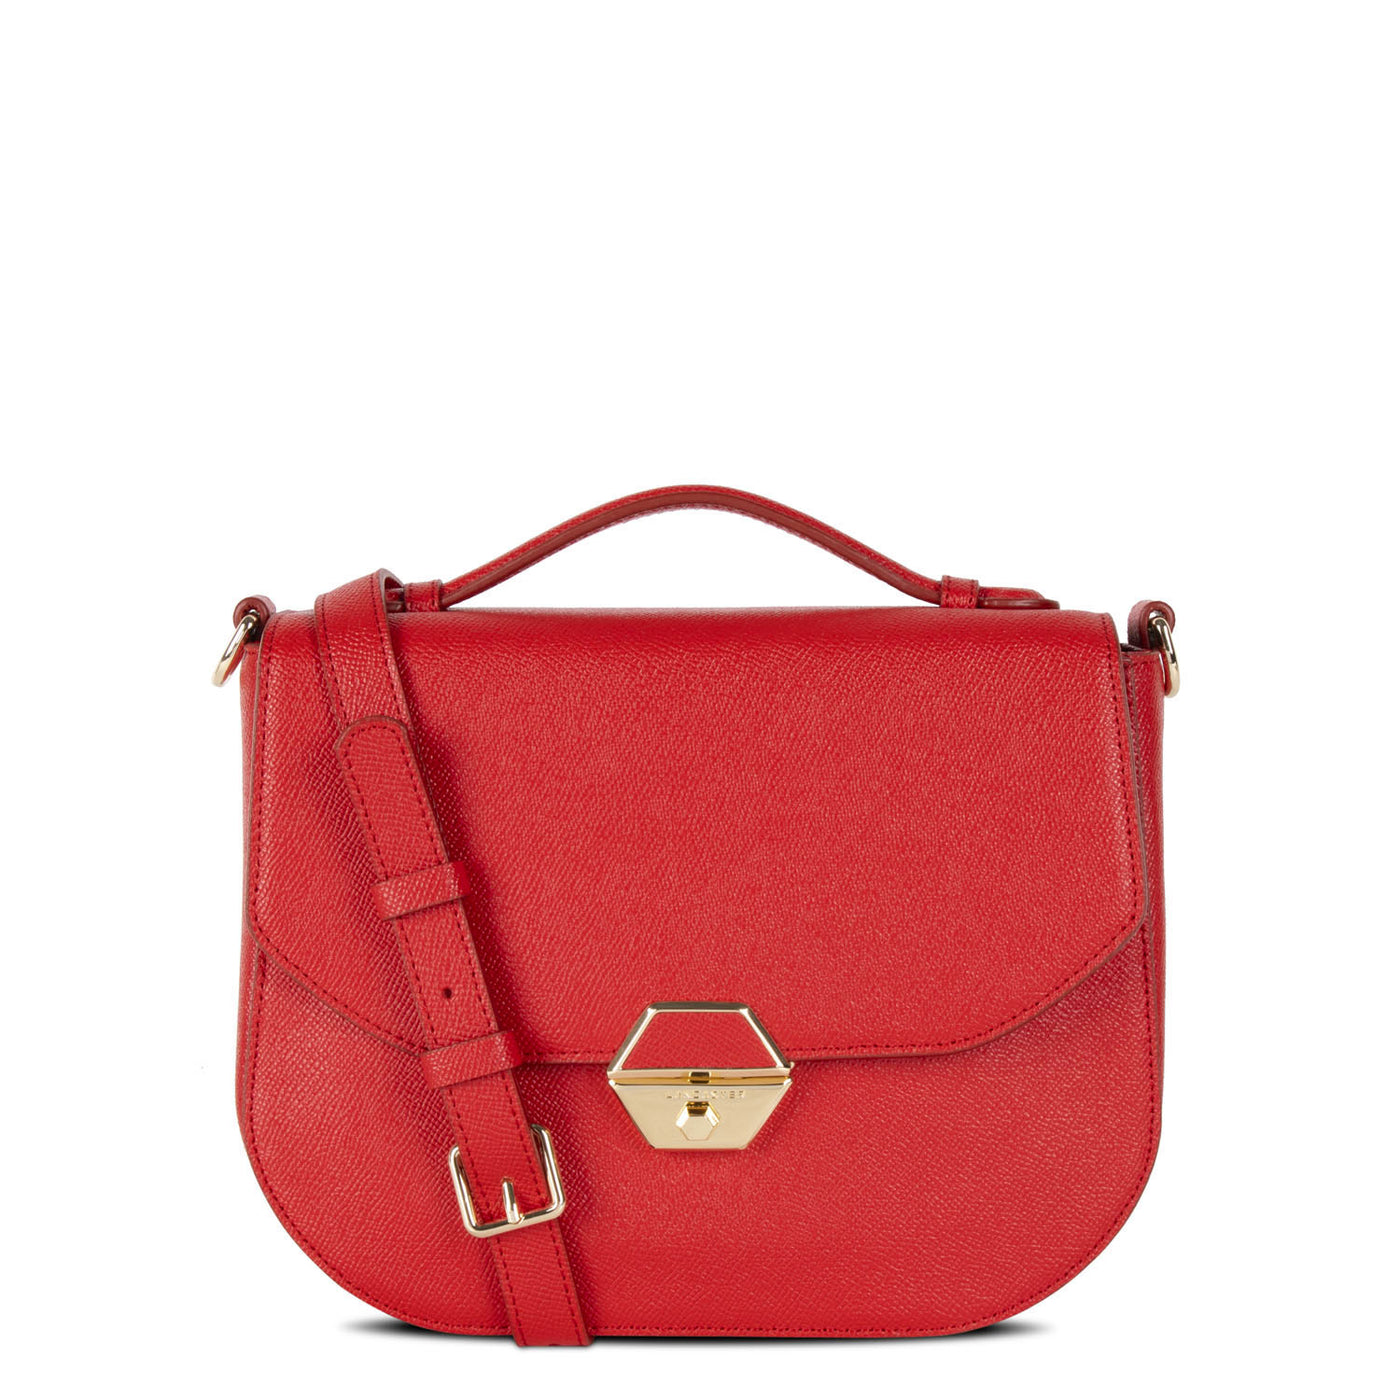 sac besace - delphino #couleur_rouge